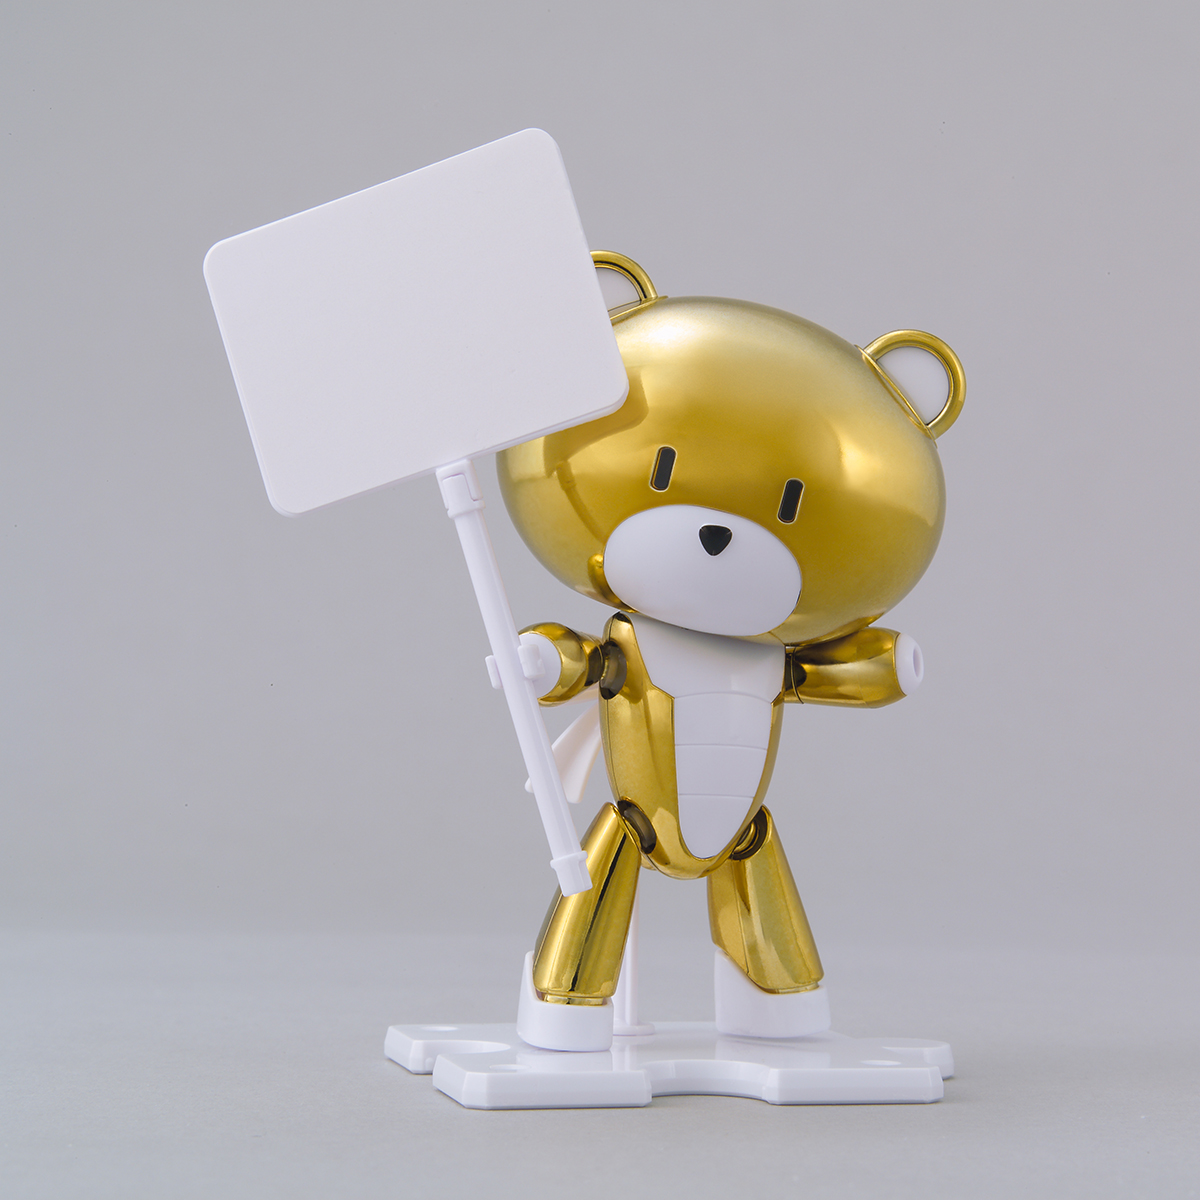 HG 1/144 THE GUNDAM BASE LIMITED PETIT'GGUY GOLD TOP & PLACARD[Sep 2020 Delivery]